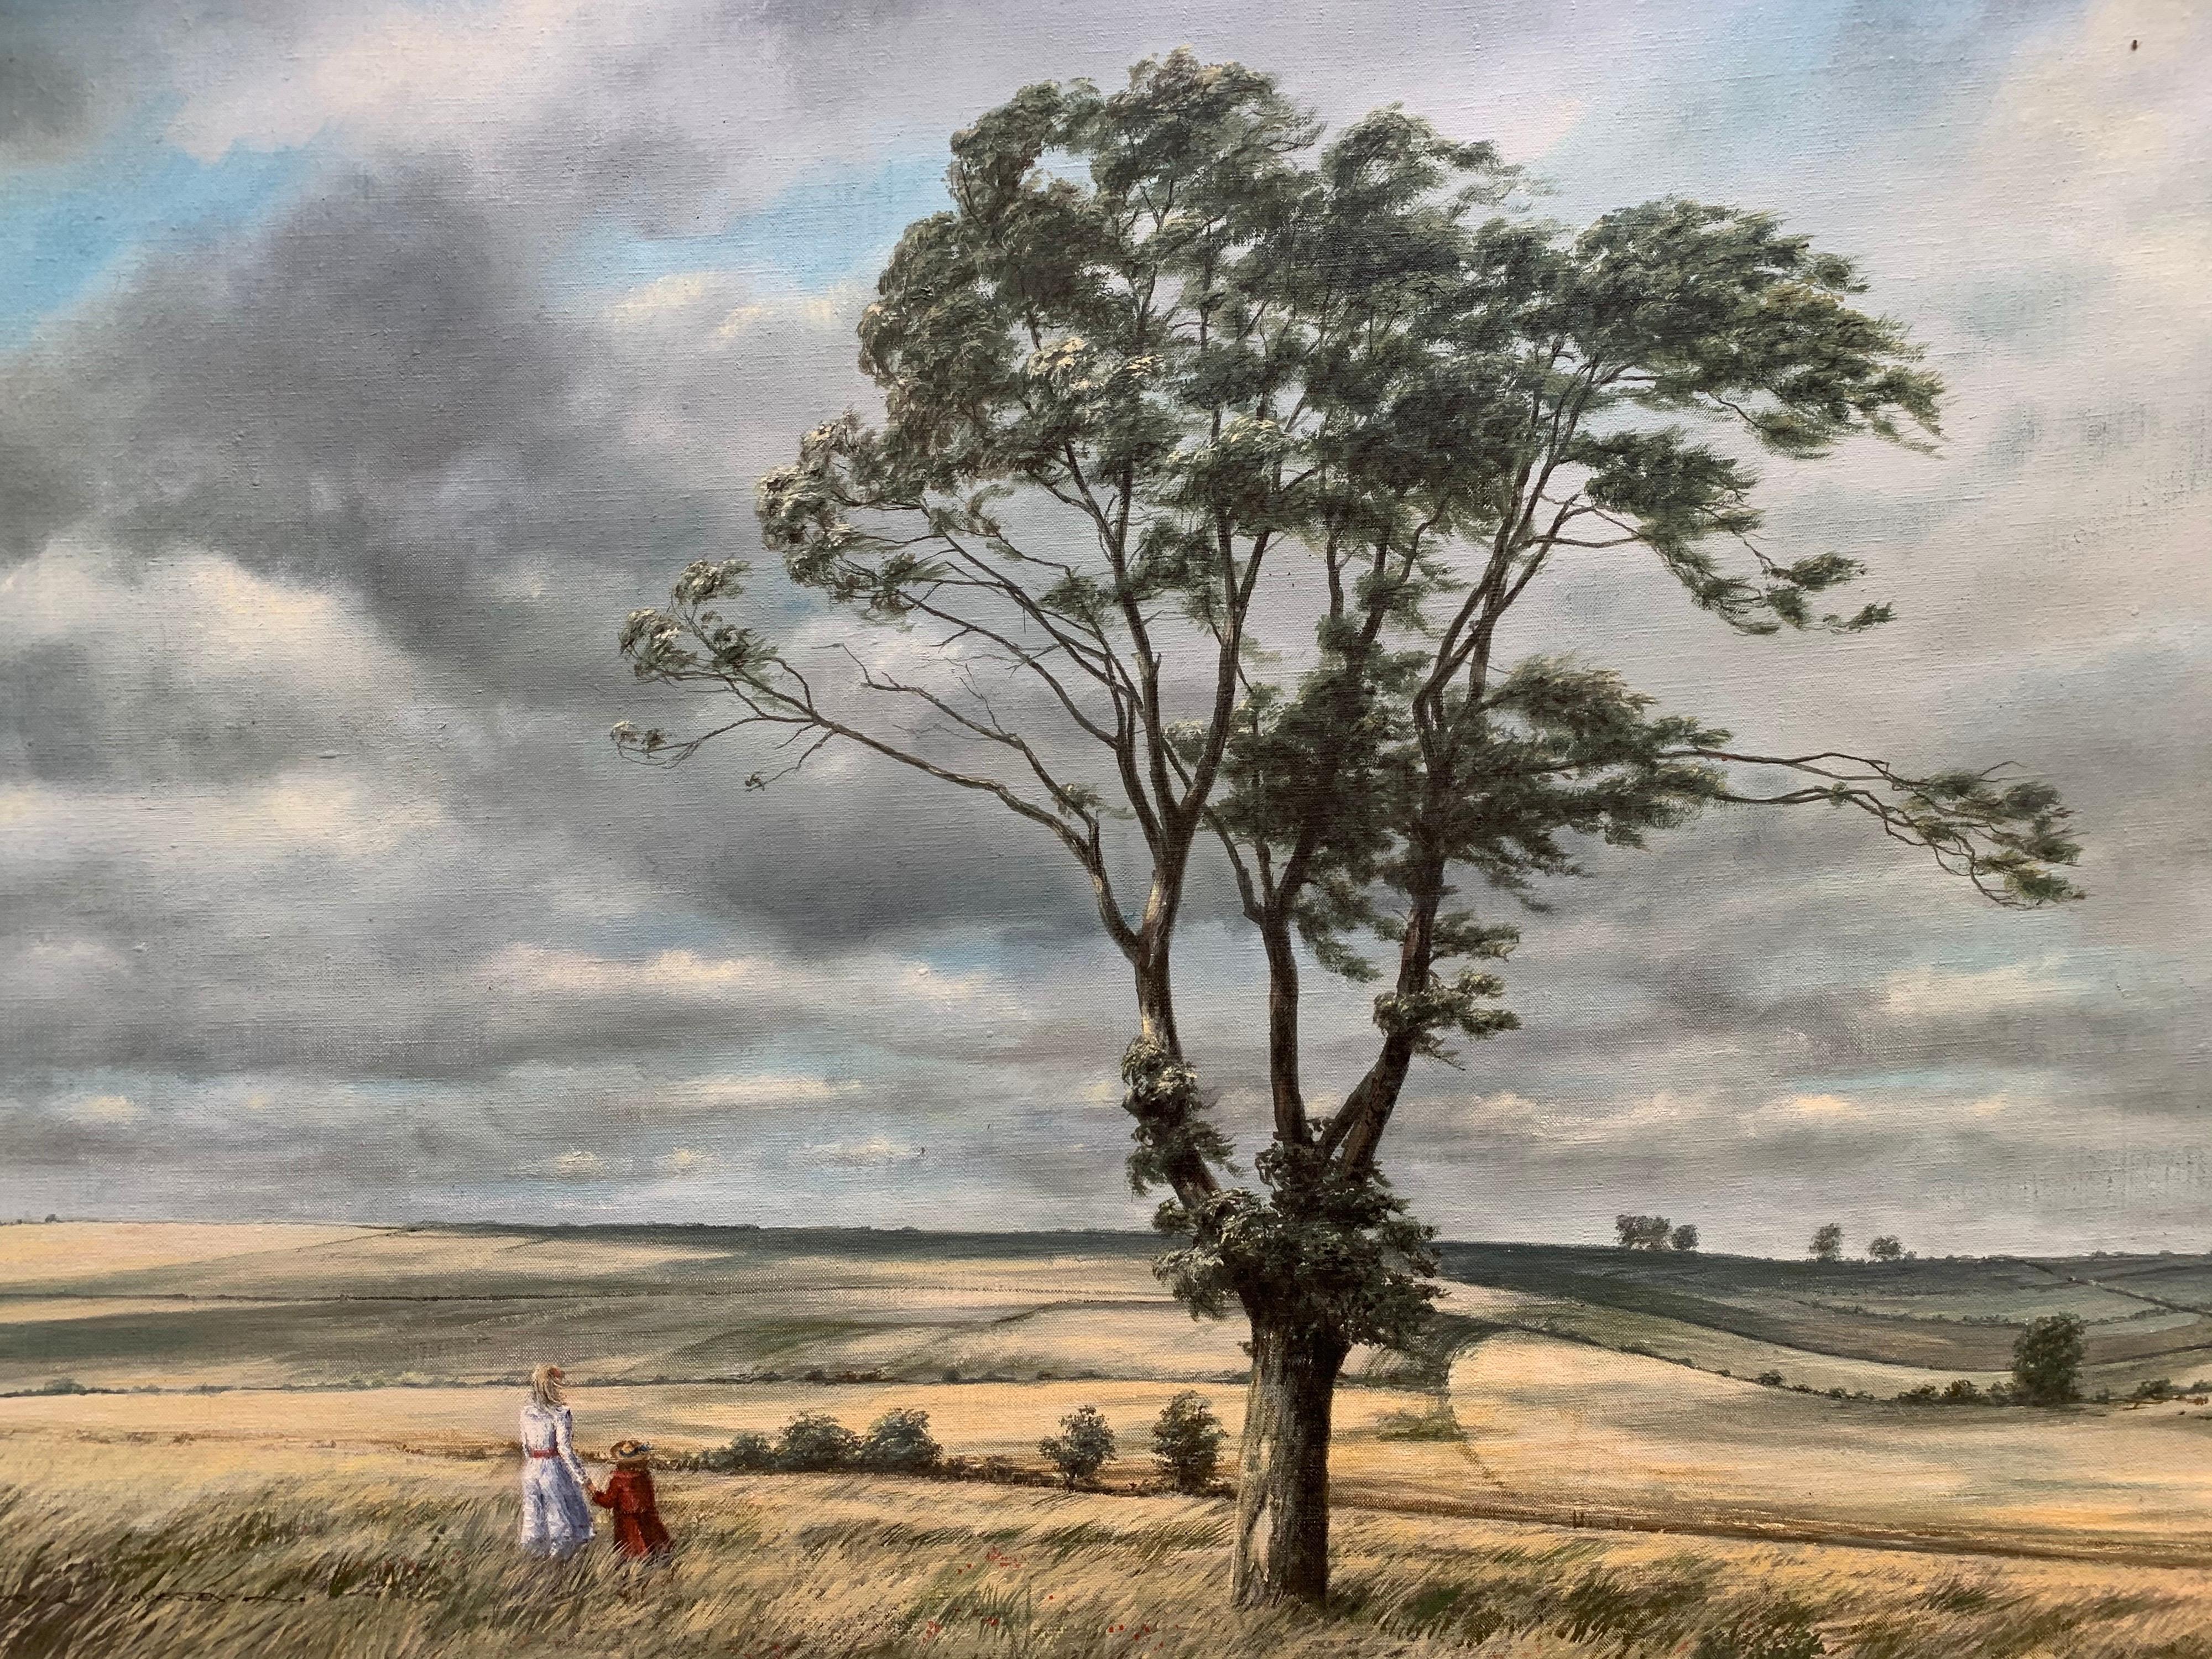 Roderick Lovesey Figurative Painting - Watching the Skies Mother & Daughter in Windswept open Field Large English Oil